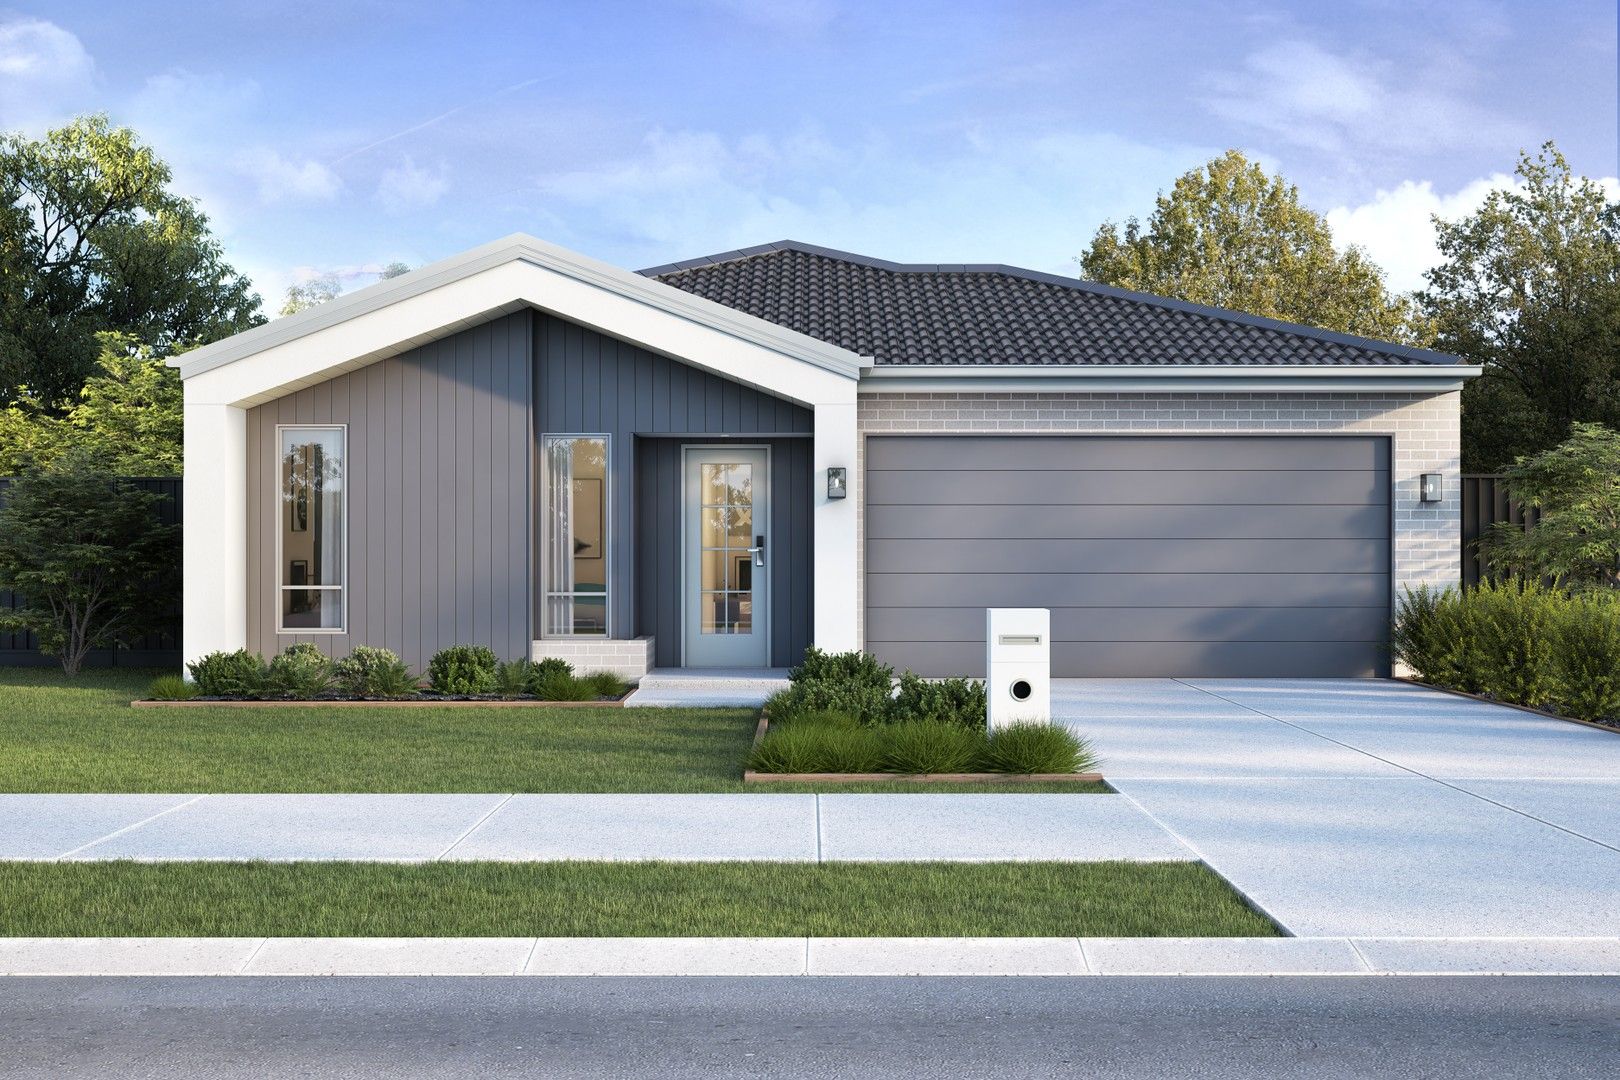 4 bedrooms New House & Land in Lot 129 Maracana Avenue WYNDHAM VALE VIC, 3024